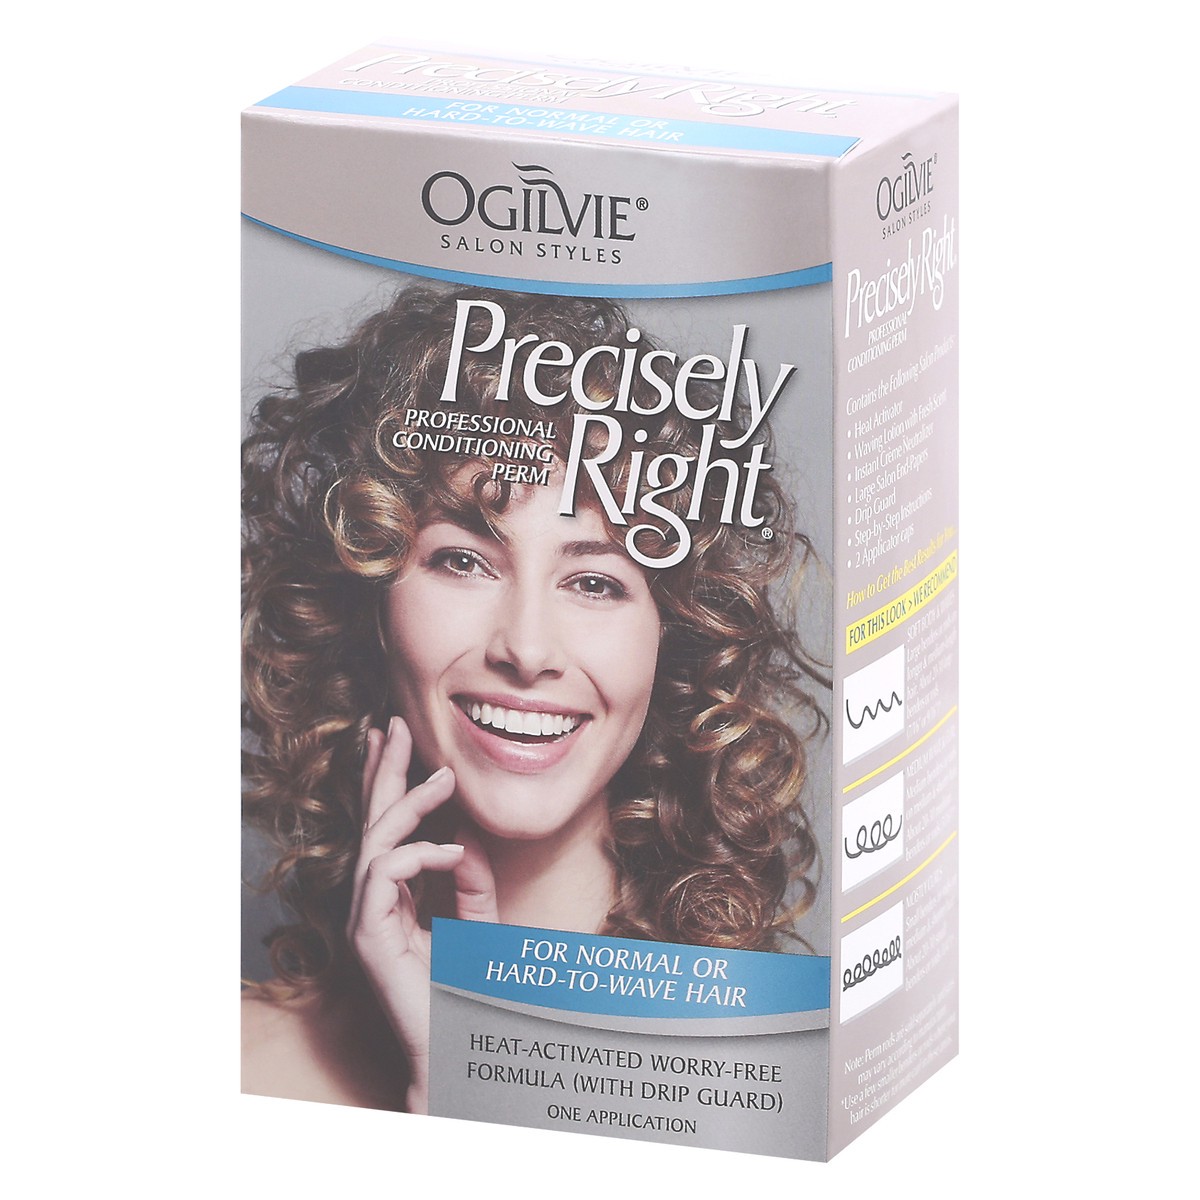 slide 3 of 9, Ogilvie Salon Styles Professional Conditioning Perm For Normal Or Hard-To-Wave Hair Precisely Right, 1 ct